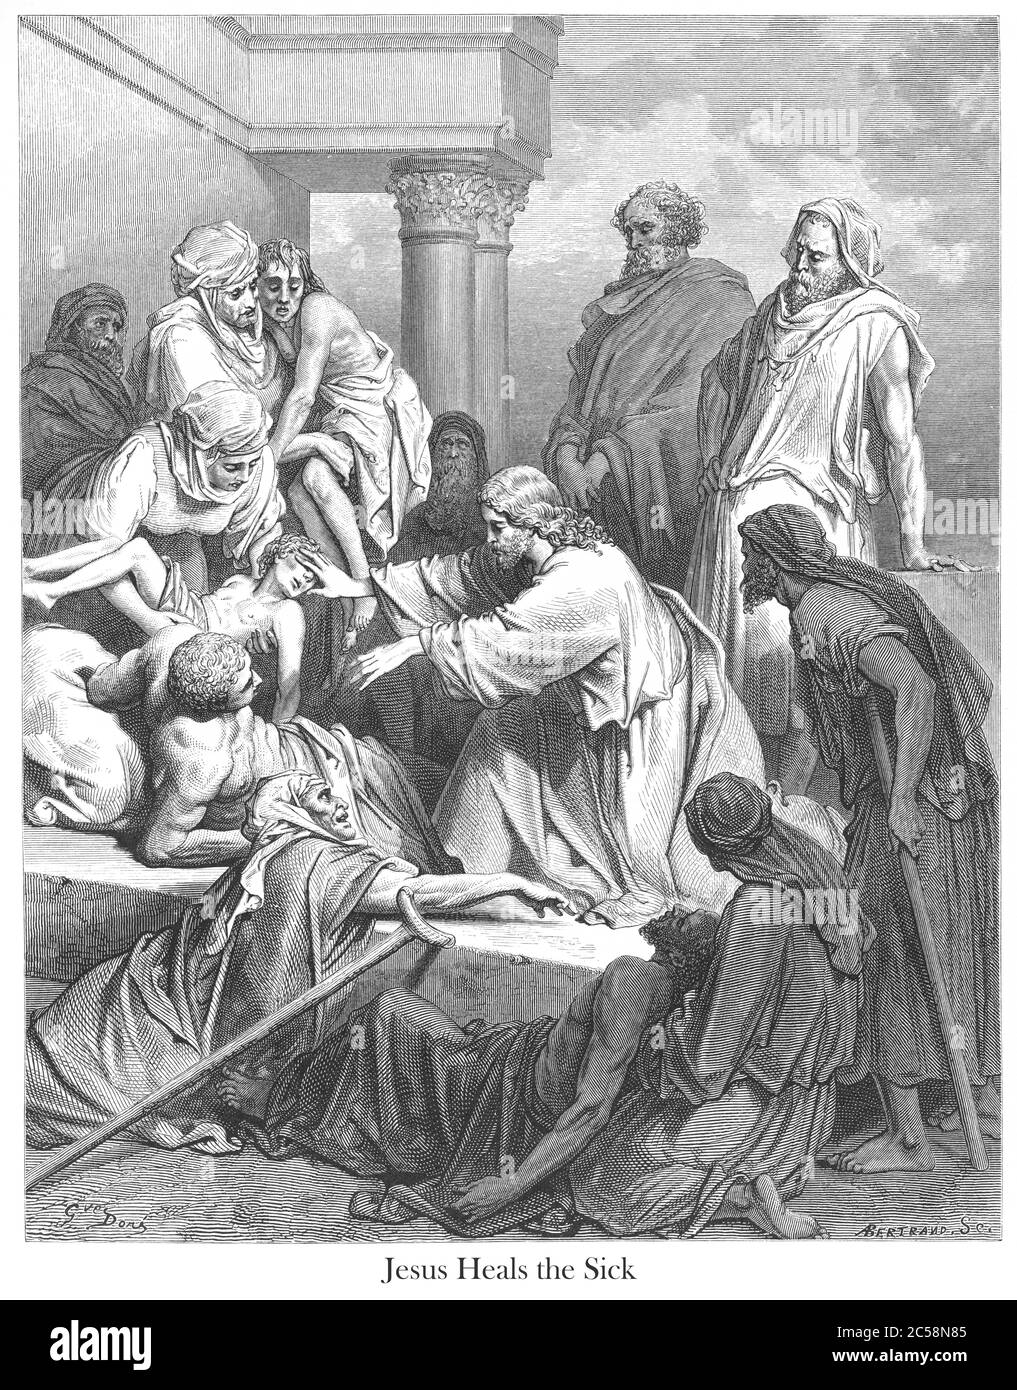 Jesus Healing the Sick [Matthew 15:31] From the book 'Bible Gallery' Illustrated by Gustave Dore with Memoir of Dore and Descriptive Letter-press by Talbot W. Chambers D.D. Published by Cassell & Company Limited in London and simultaneously by Mame in Tours, France in 1866 Stock Photo